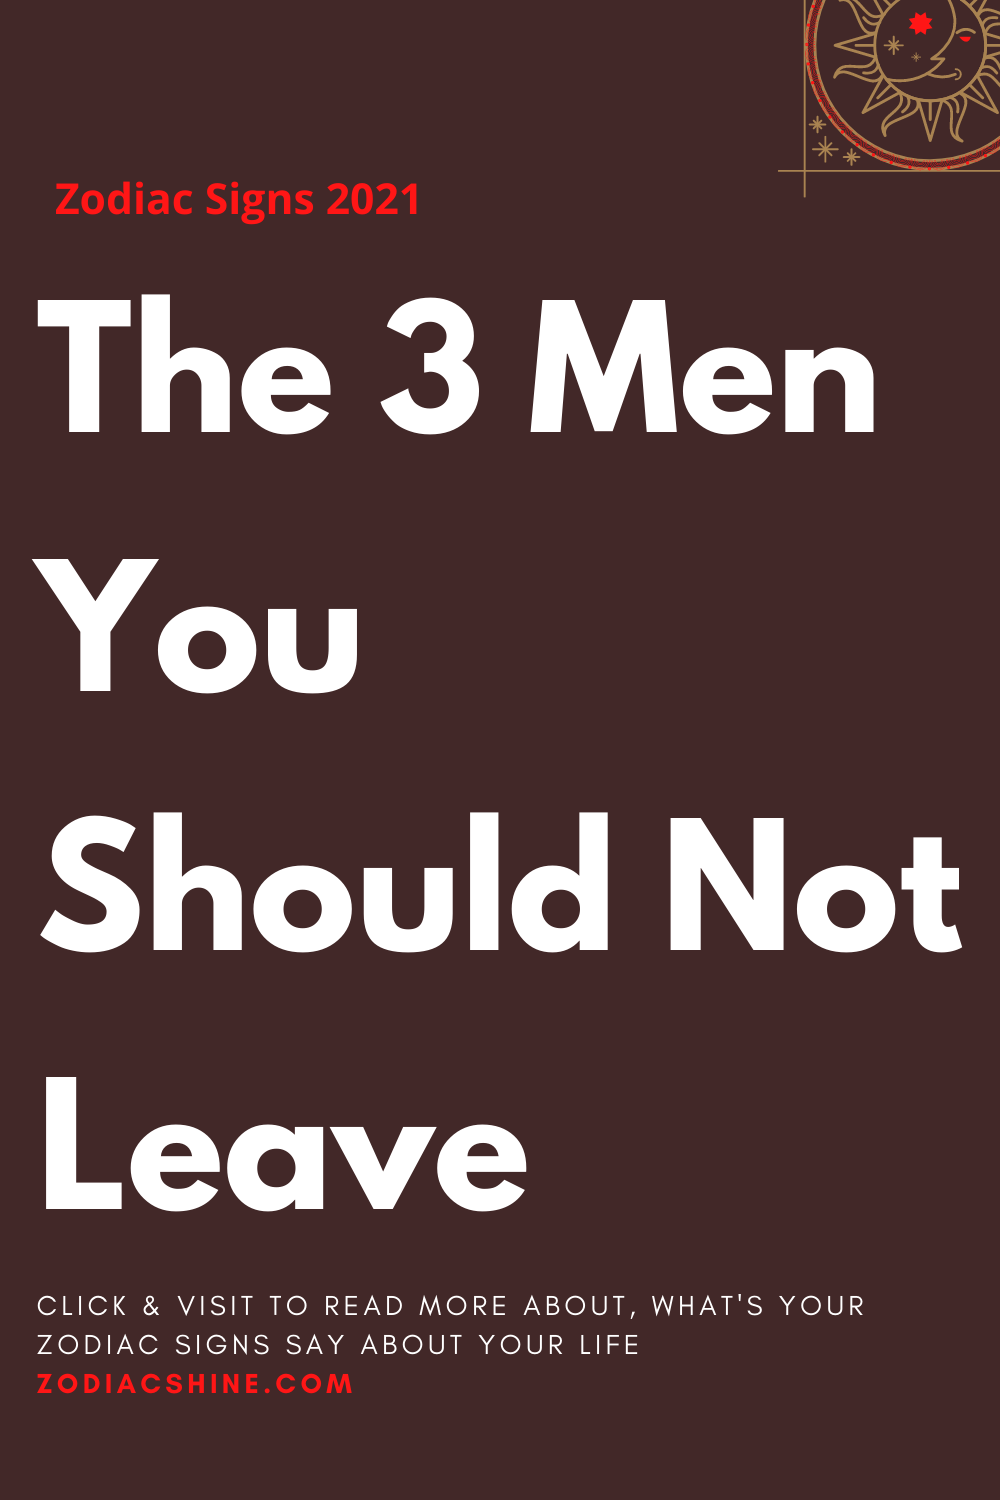 The 3 Men You Should Not Leave